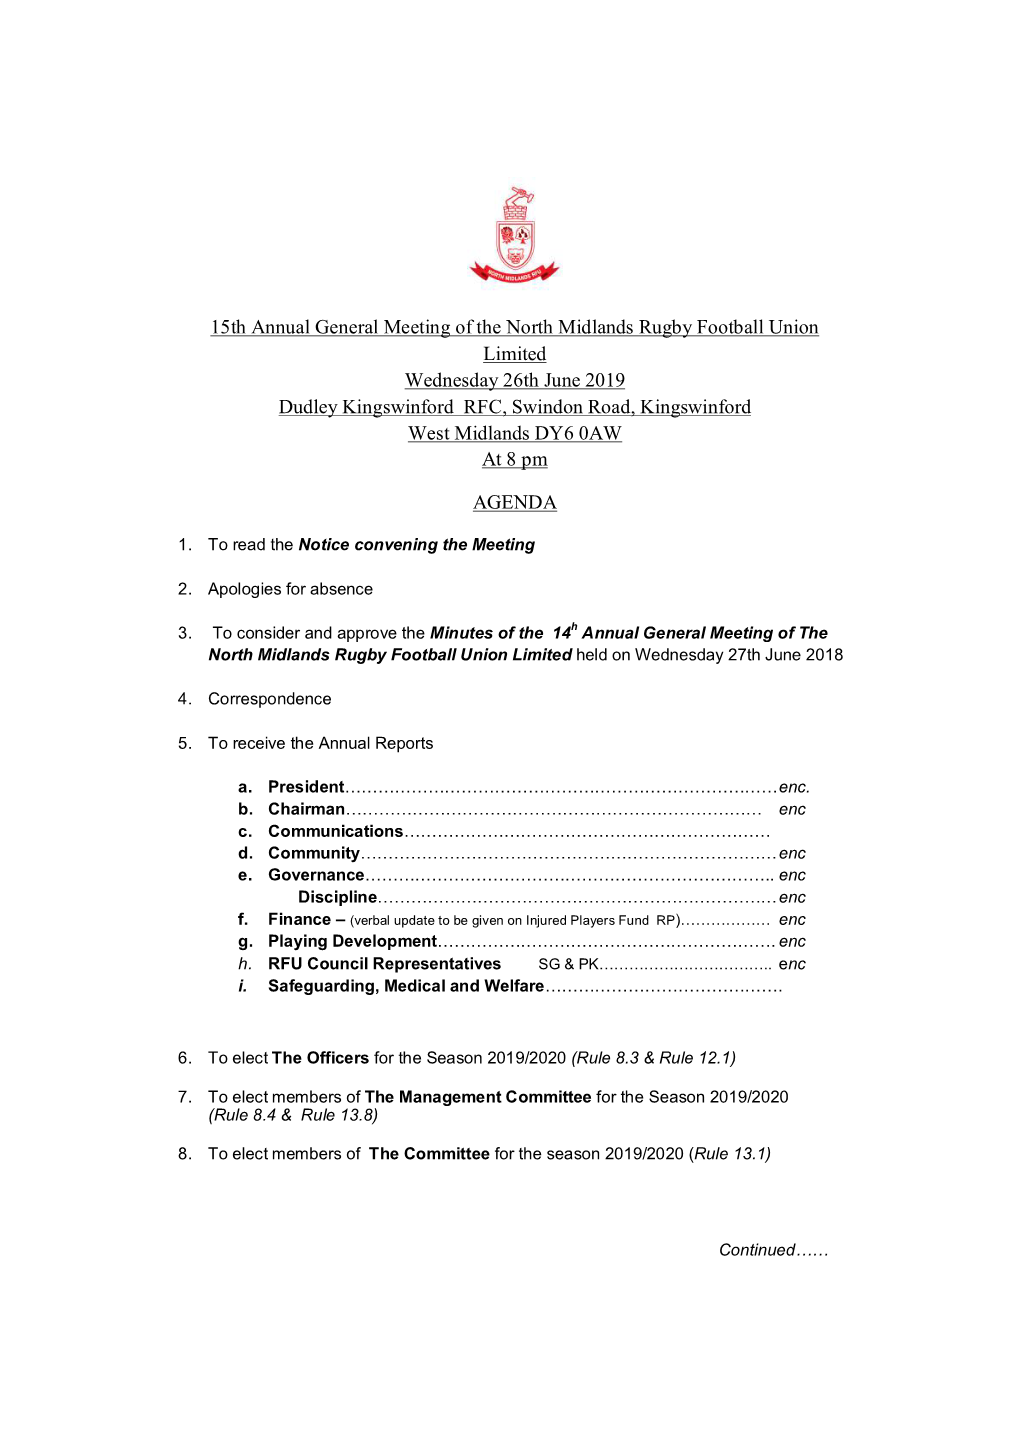 15Th Annual General Meeting of the North Midlands Rugby Football Union Limited Wednesday 26Th June 2019 Dudley Kingswinford